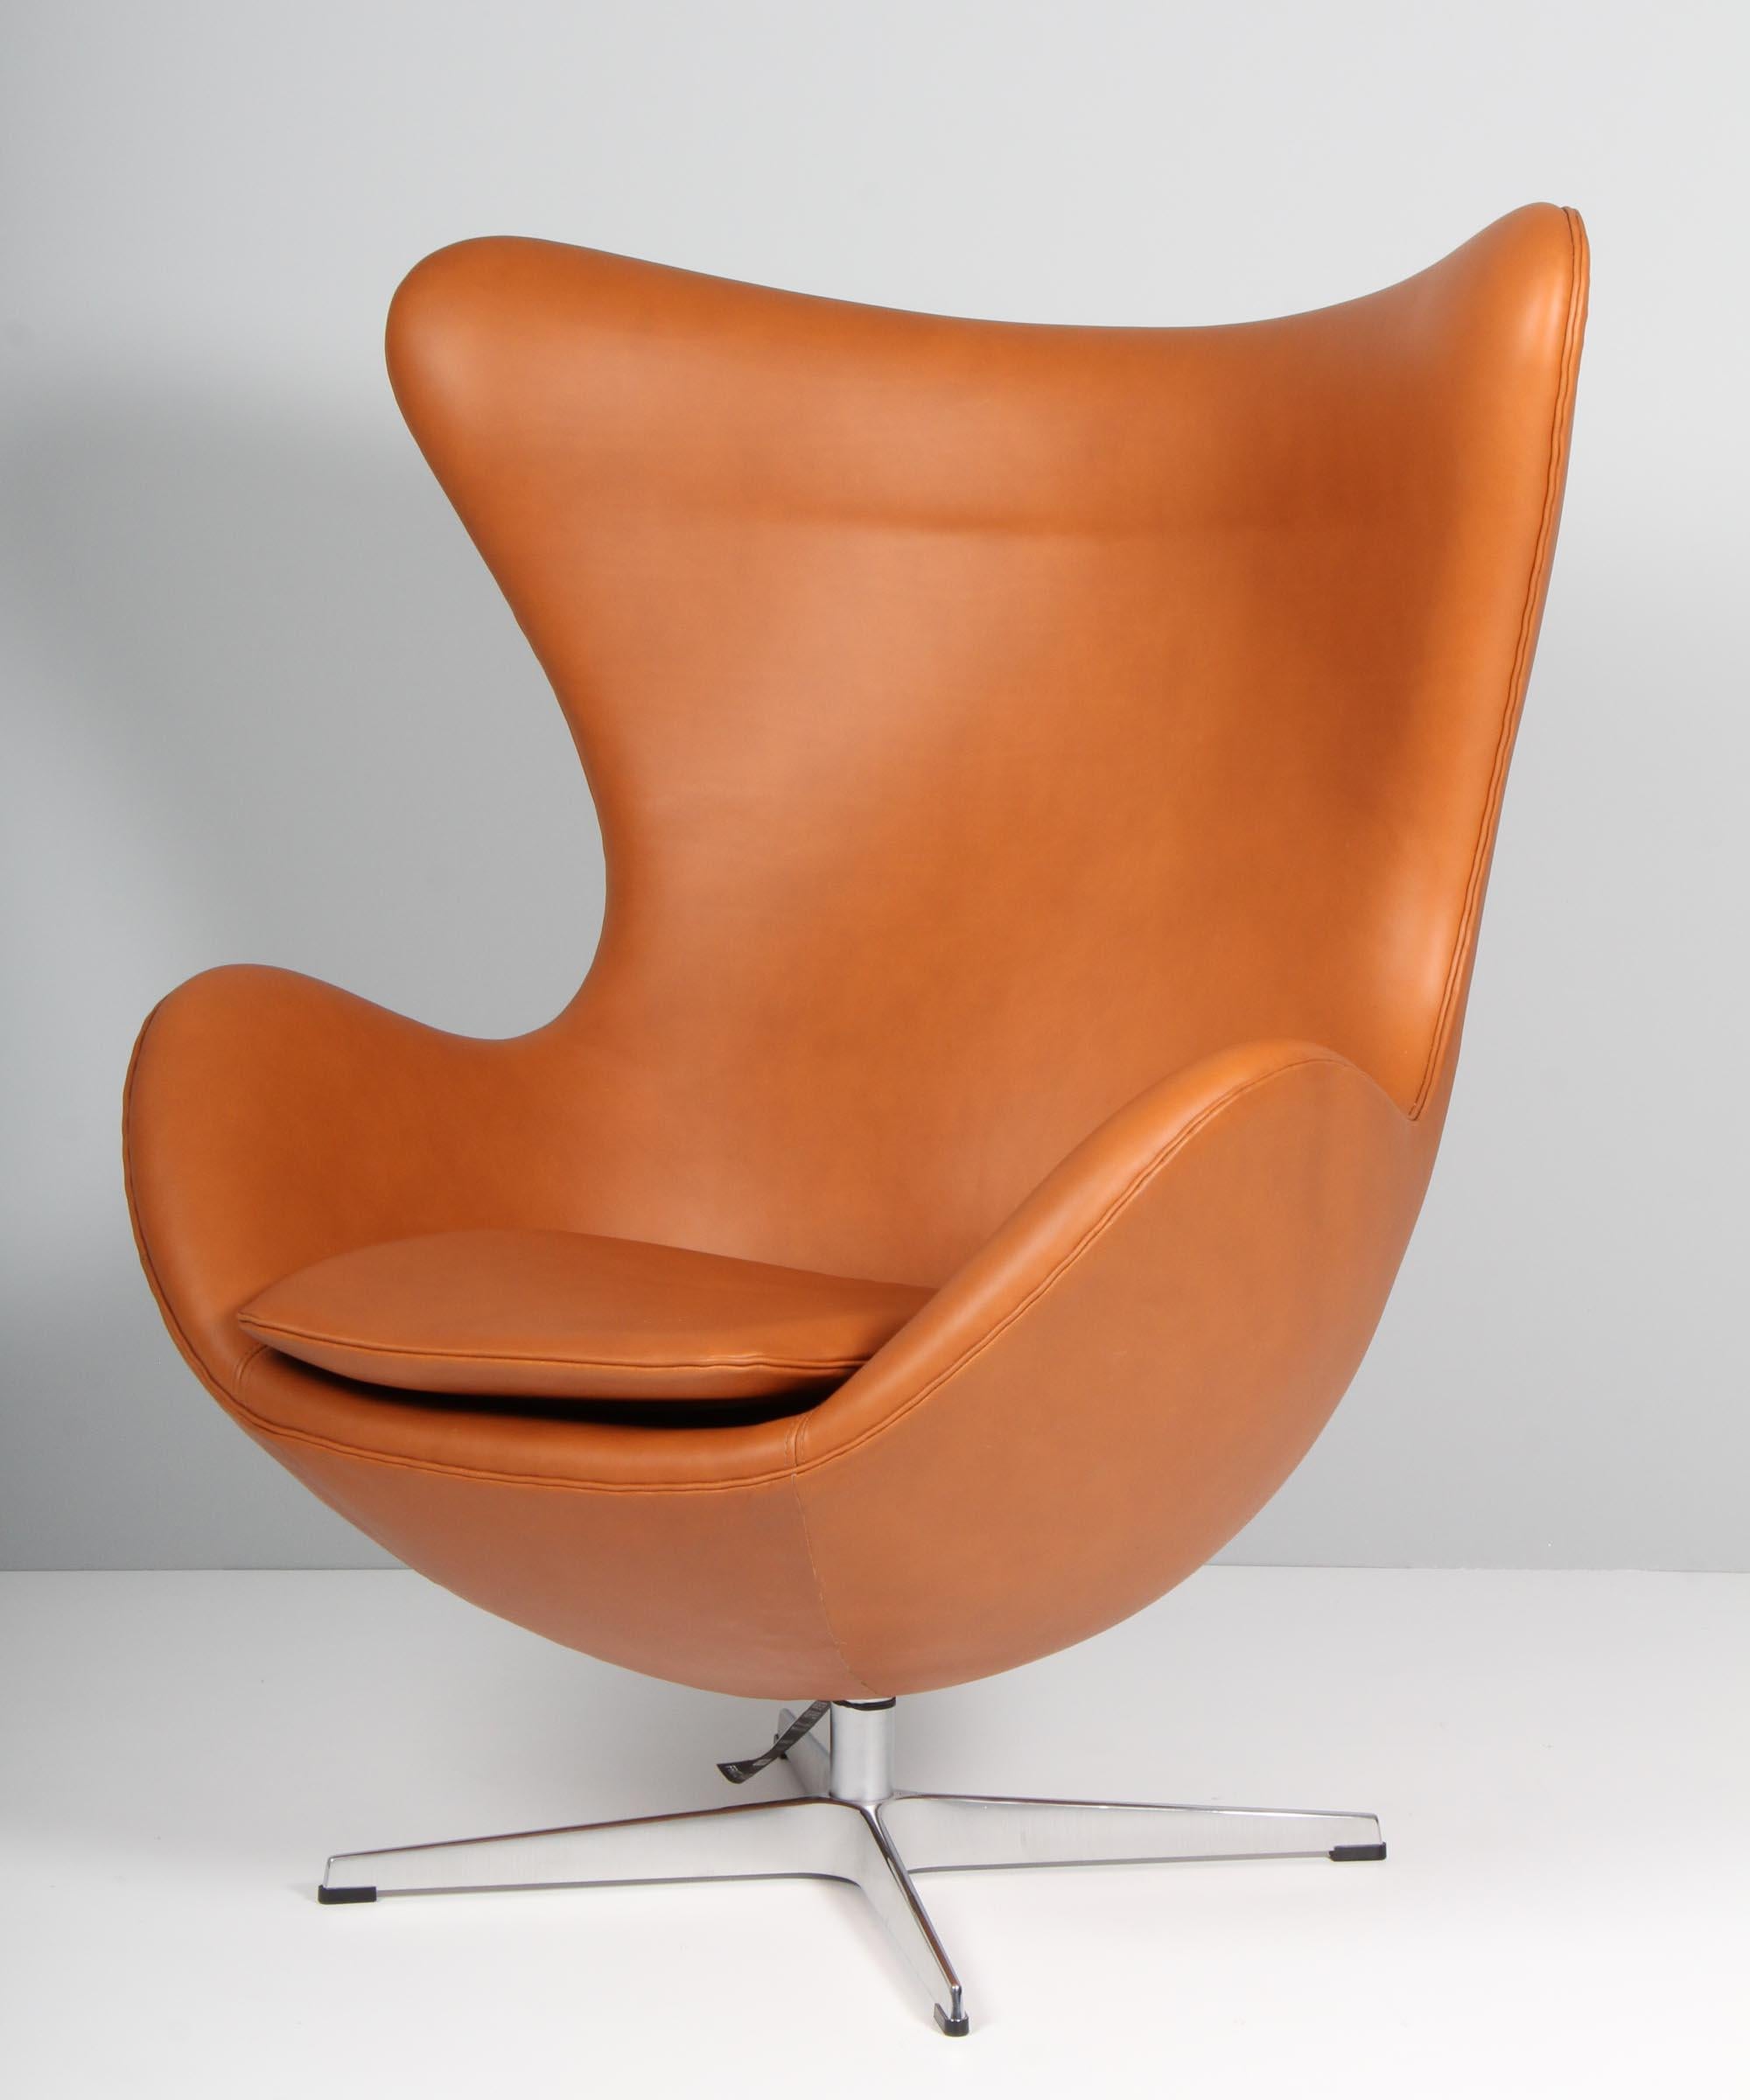 New Arne Jacobsen set of lounge chairs model Egg. New upholstered with walnut aniline leather.

Four star base with tilt function.

Made by Fritz Hansen.

This iconic chair is one of the most famous chairs in the world and is recognized by